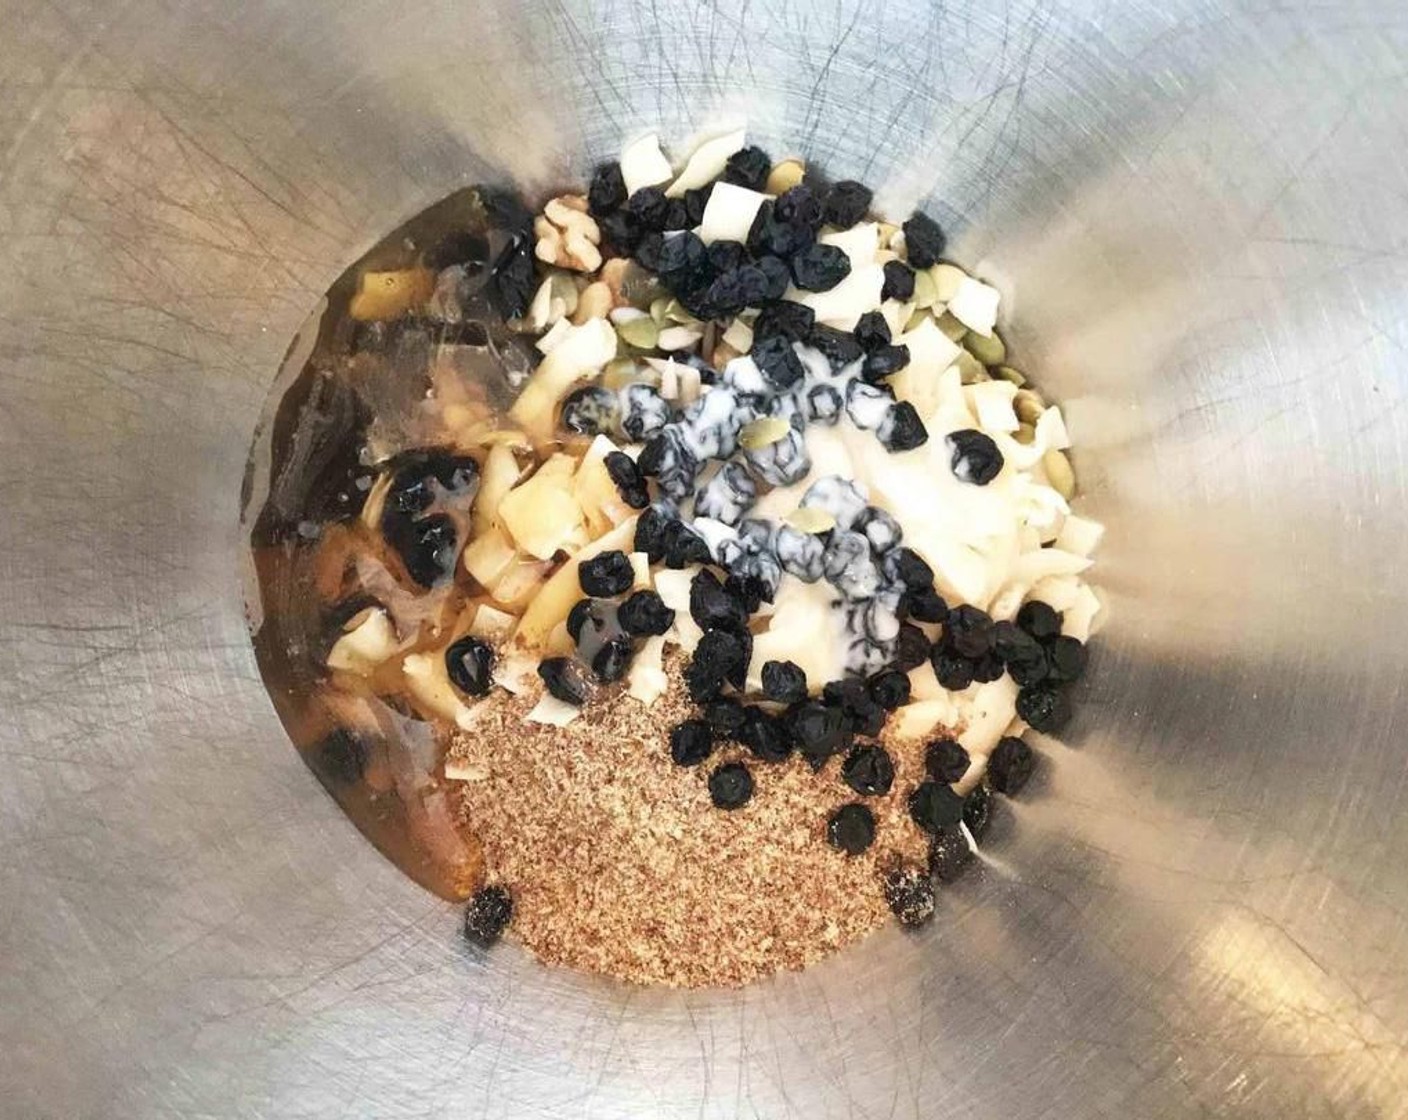 step 2 Place Raw Cashews (1/2 cup), Raw Walnuts (1/2 cup), Coconut Chips (1/2 cup), Pepitas (1/3 cup), Raw Sunflower Seeds (1/3 cup), Flaxseed Meal (1/4 cup), Dried Blueberries (1/4 cup), {@10:}, Coconut Butter (1 Tbsp), Chia Seeds (1/2 tsp), and Vanilla Extract (1/2 tsp) a large bowl.